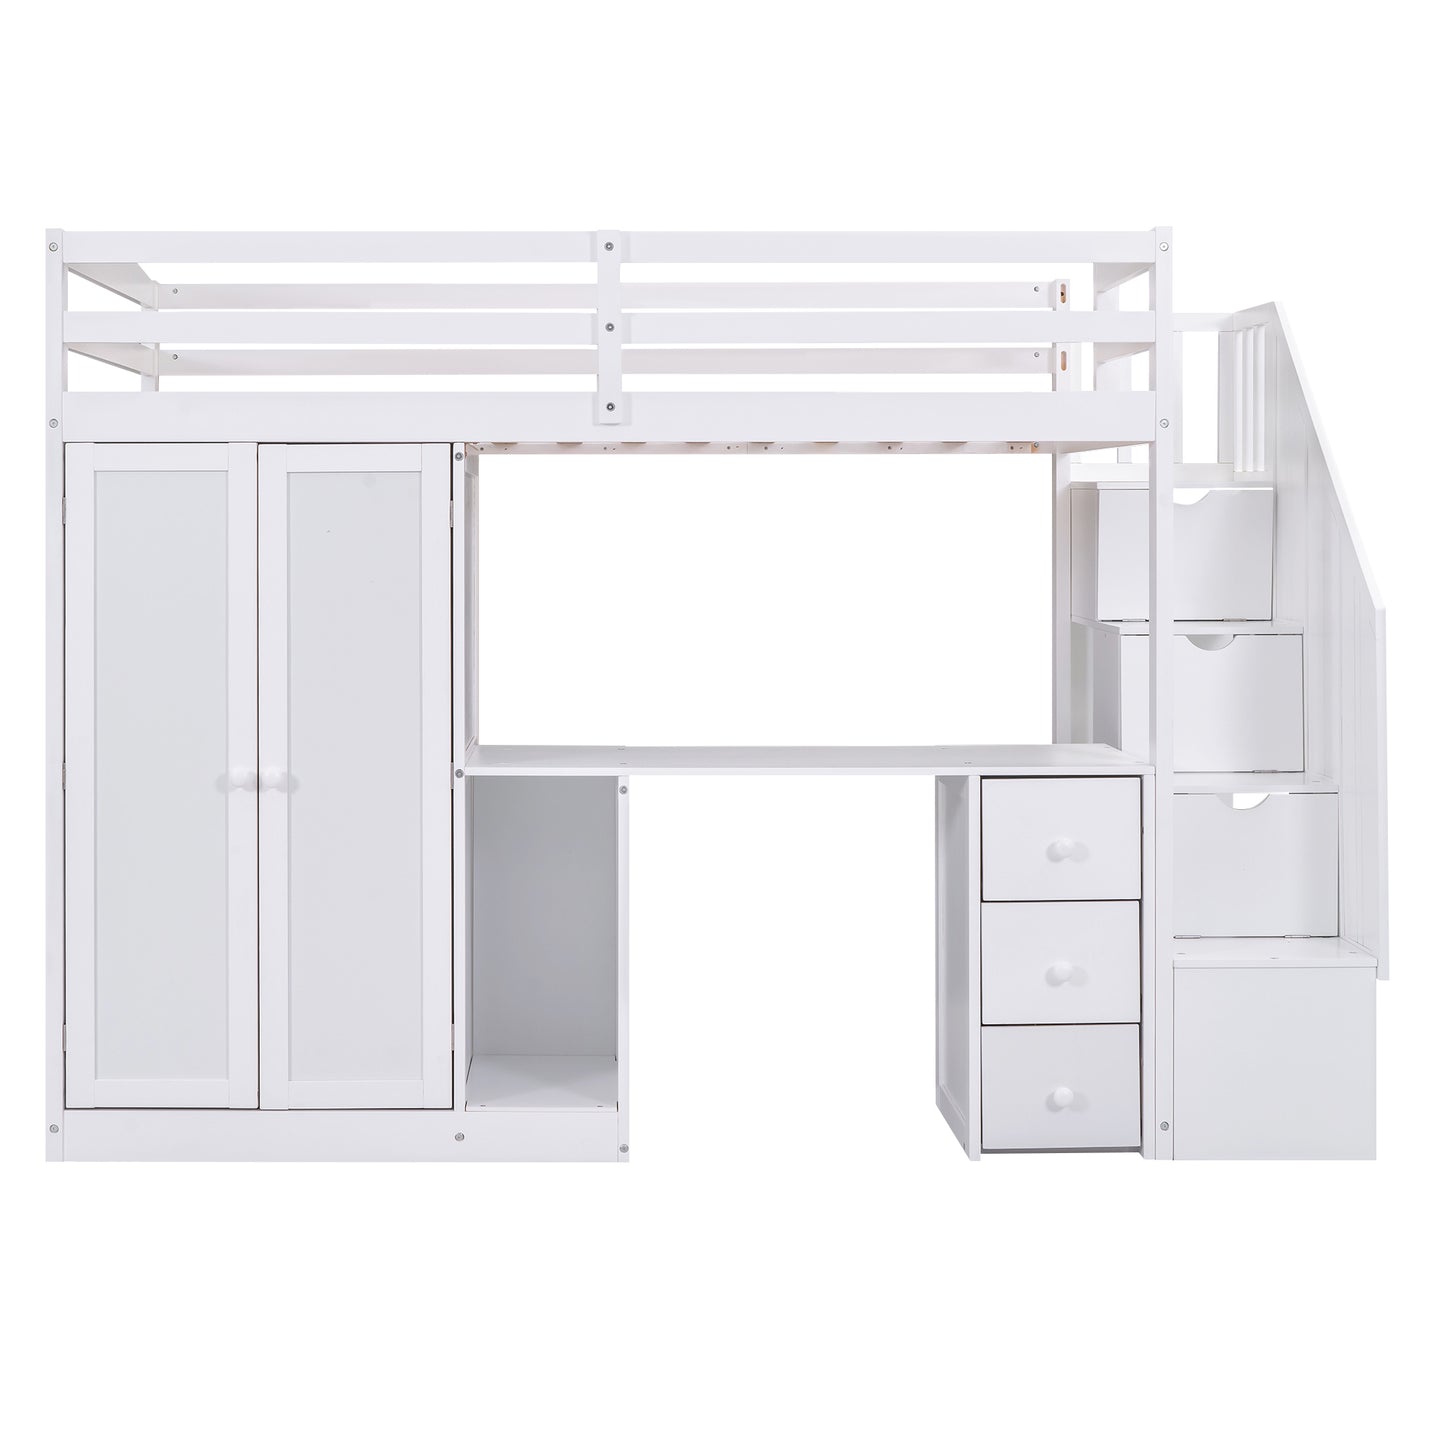 Twin Size Loft Bed with Wardrobe and Staircase, Desk and Storage Drawers and Cabinet in 1, White